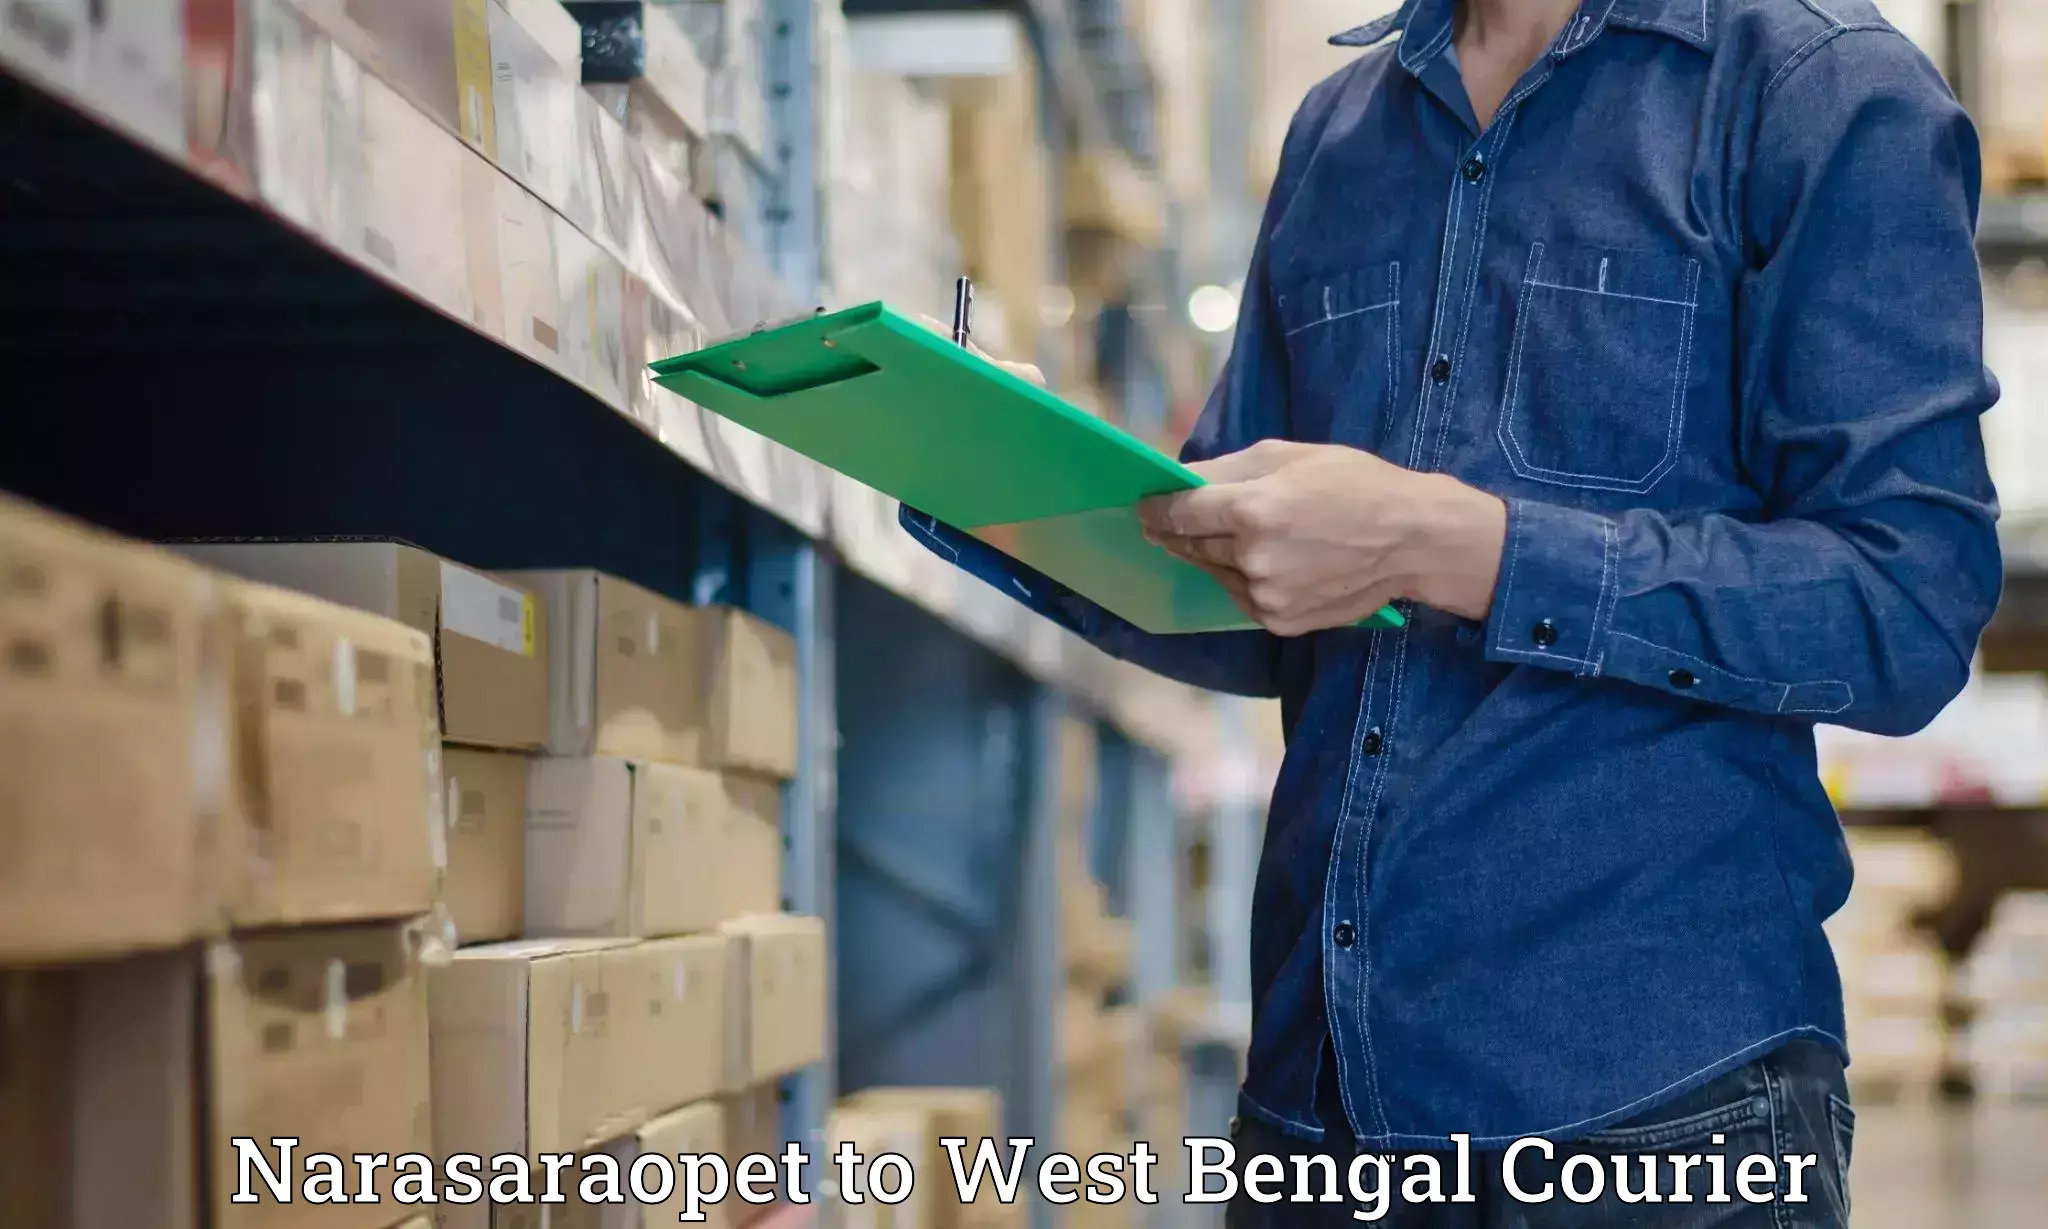 On-call courier service Narasaraopet to Durgapur